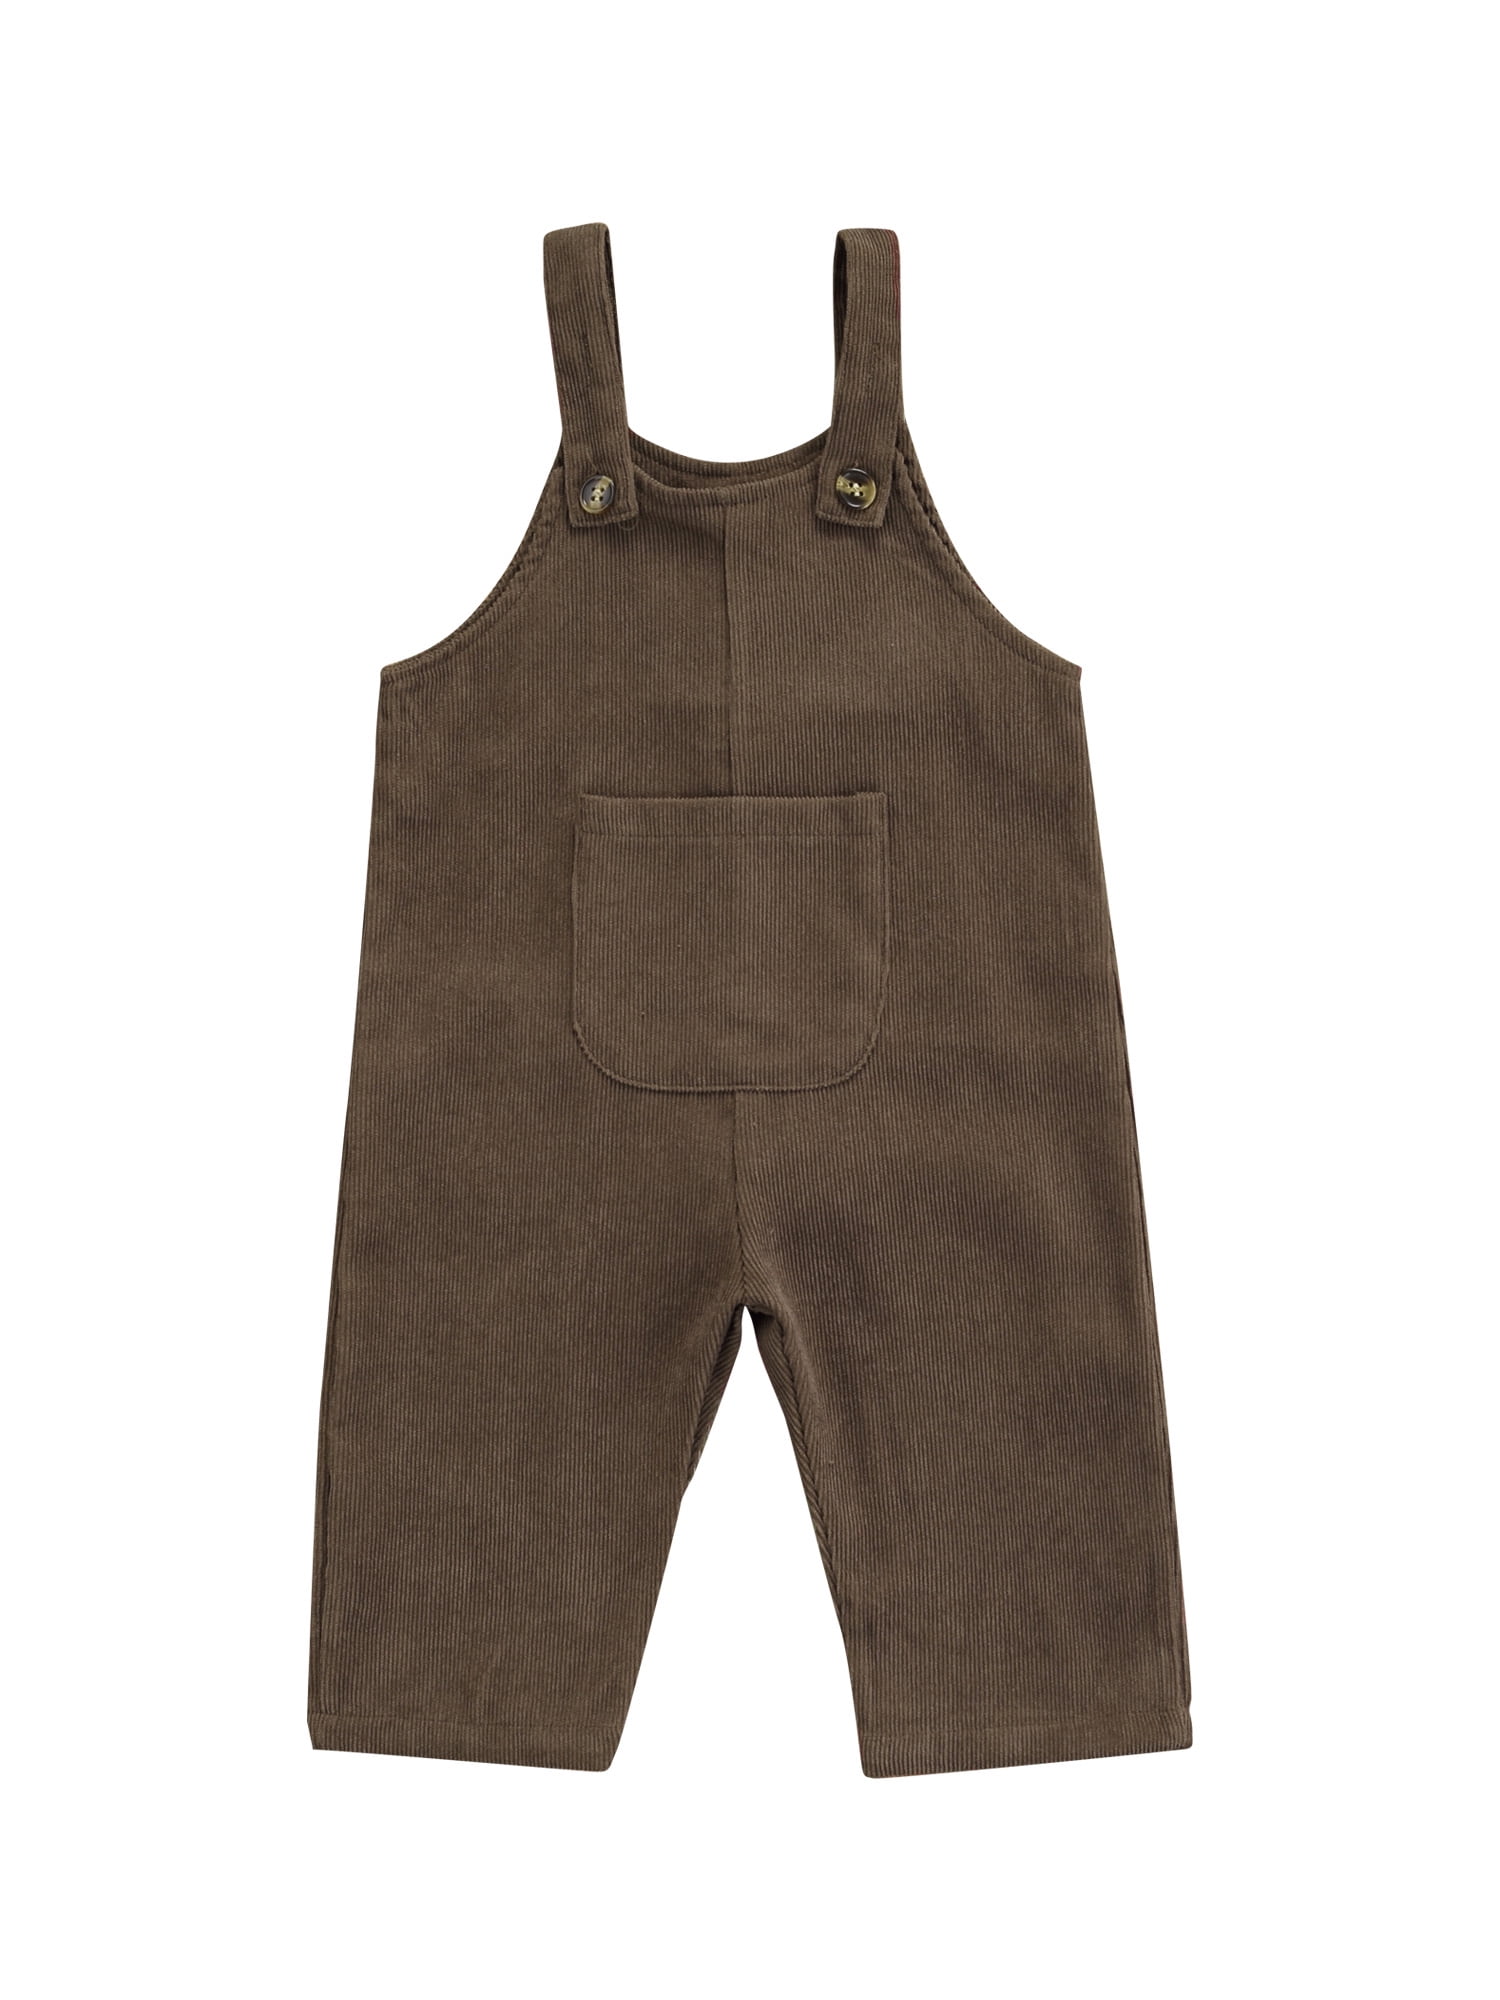 Toddler Baby Boys Girls Corduroy Overalls Solid Color Suspender Trousers Ribbed Bib Pants Casual Outfit 